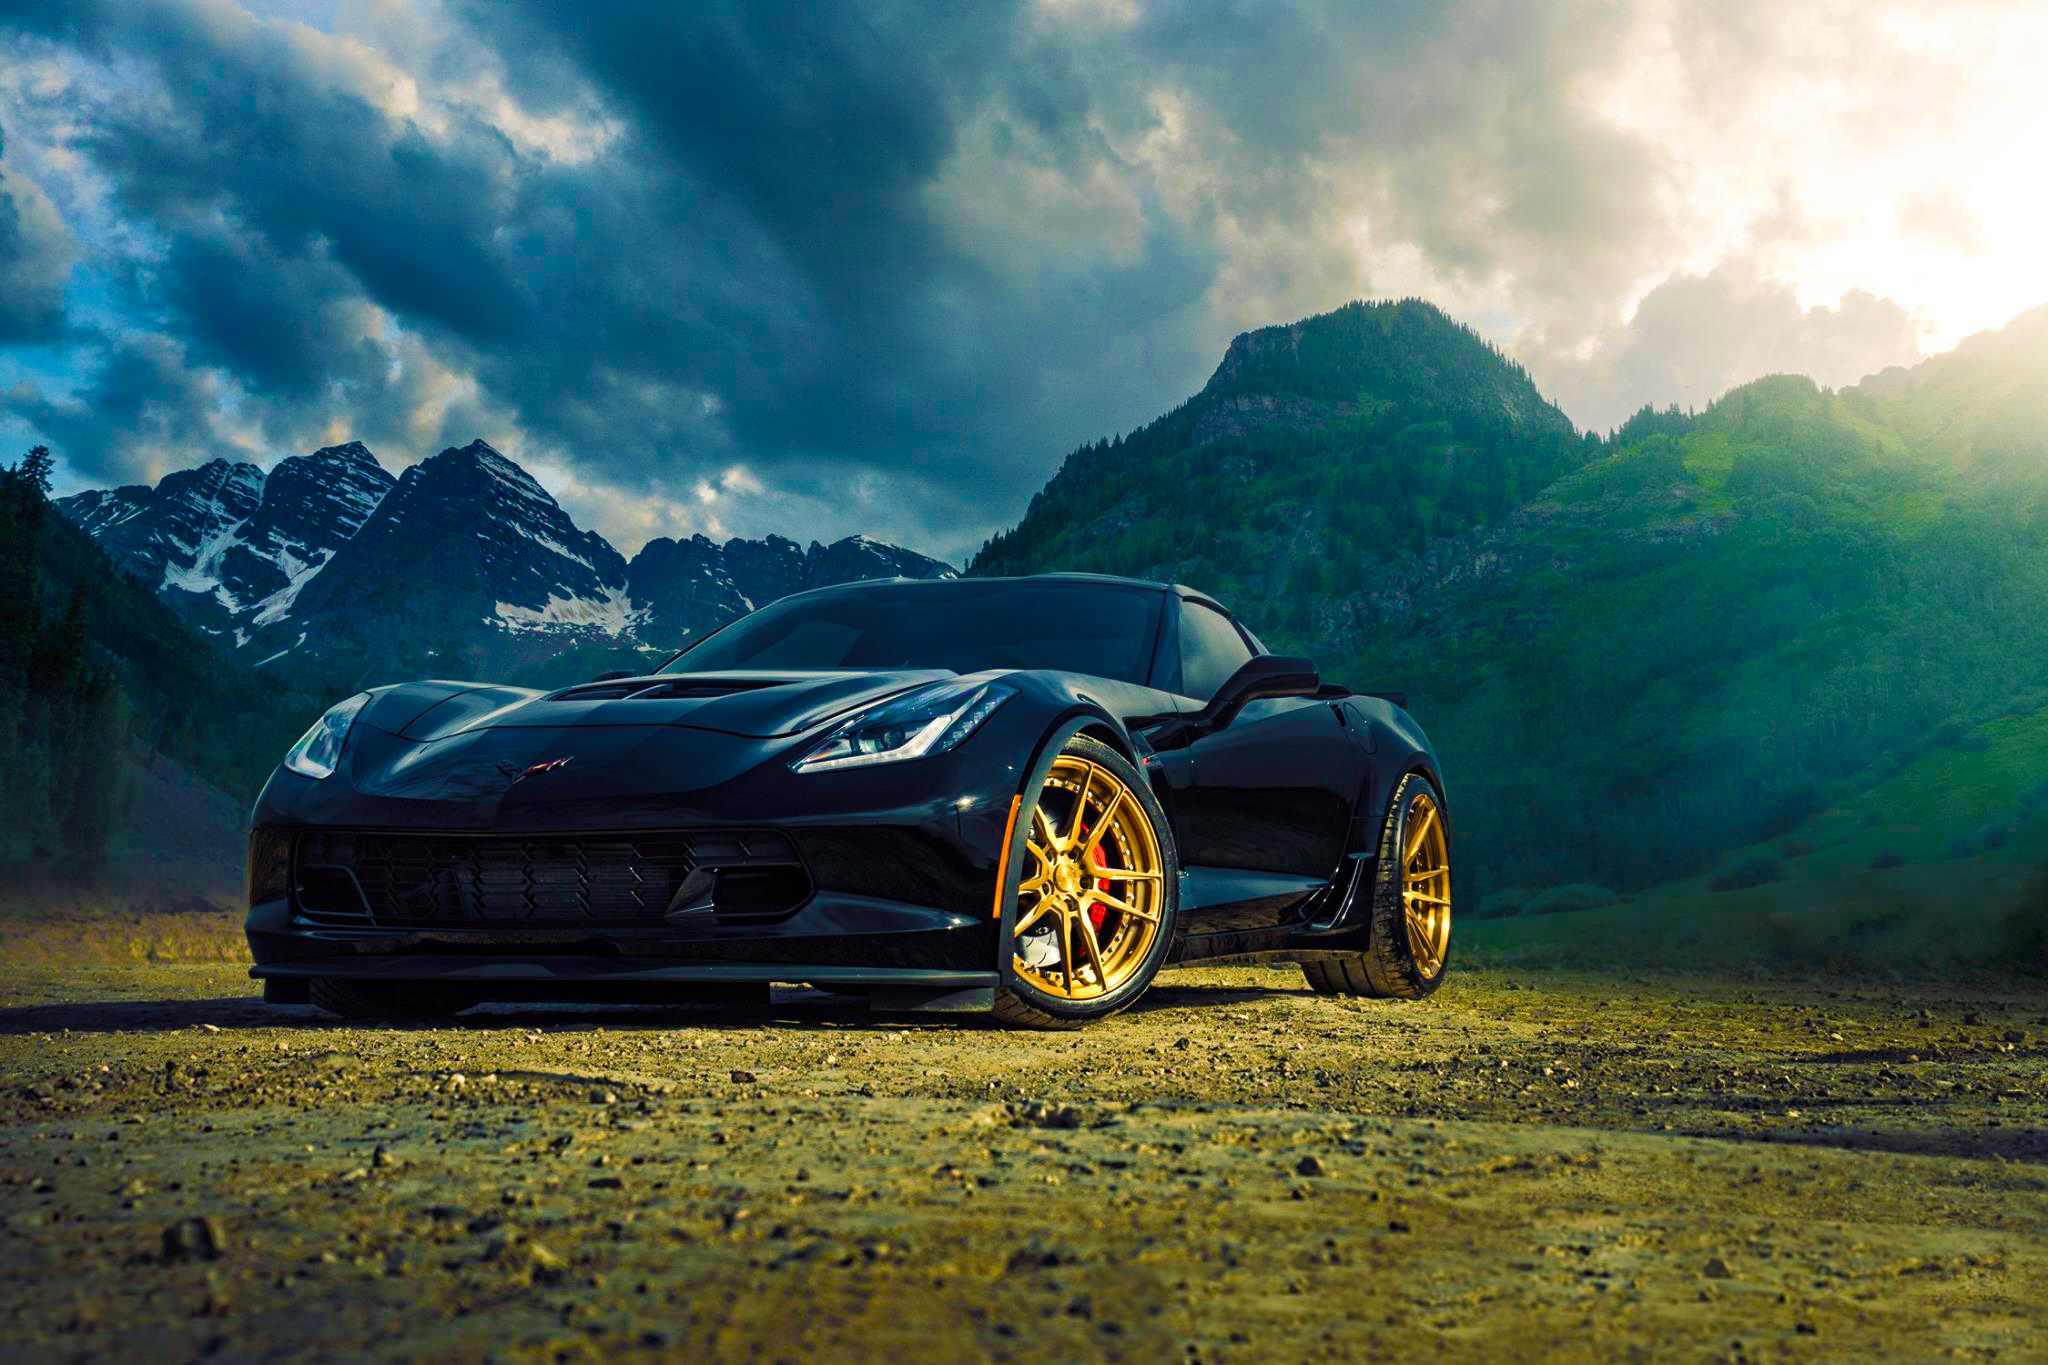 87225 download wallpaper cars, mountains, chevrolet, blue, side view, corvette, z06 screensavers and pictures for free